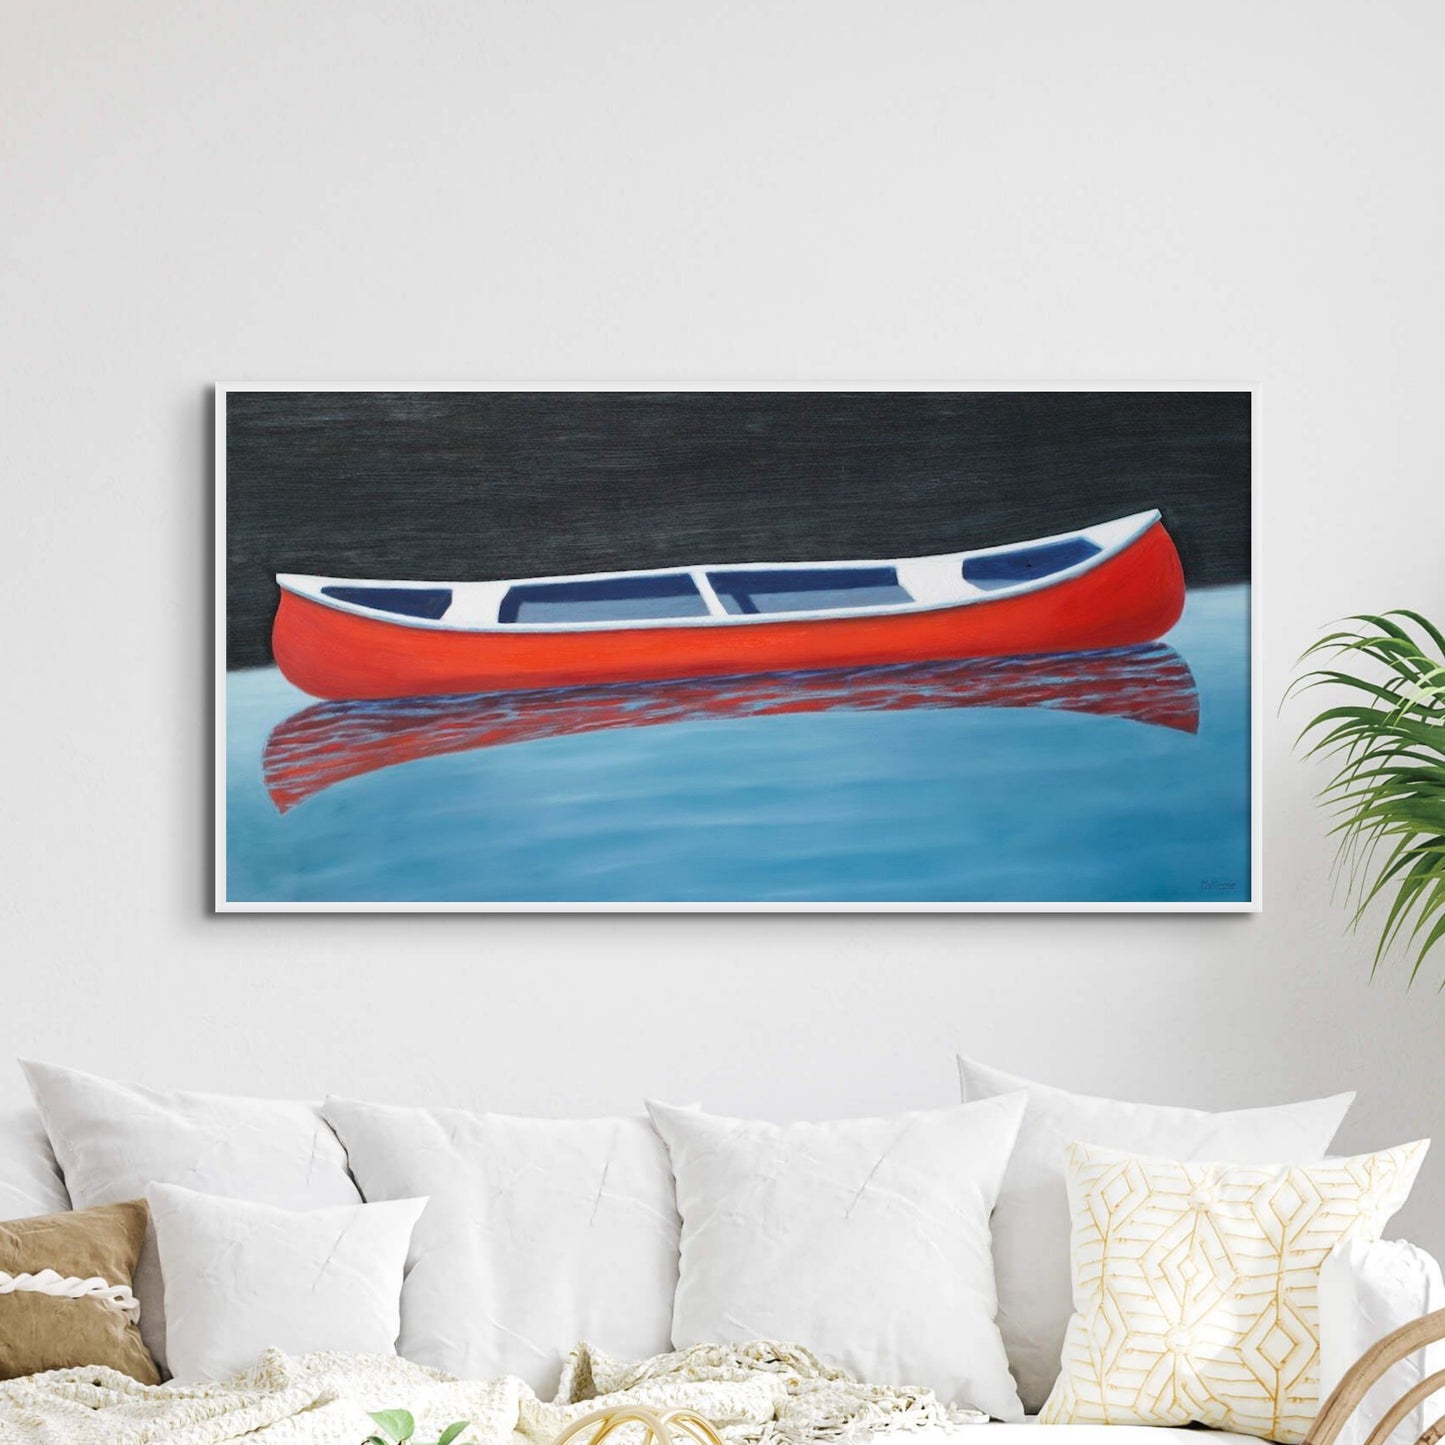 A painting of a red canoe by Canadian artist Catherine McKinnon. The small red boat is floating on almost still blue water in the foreground and the background is pitch black. The giclee print is framed in white. It is mounted on a light gray wall above a stylish, contemporary couch with many white cushions.